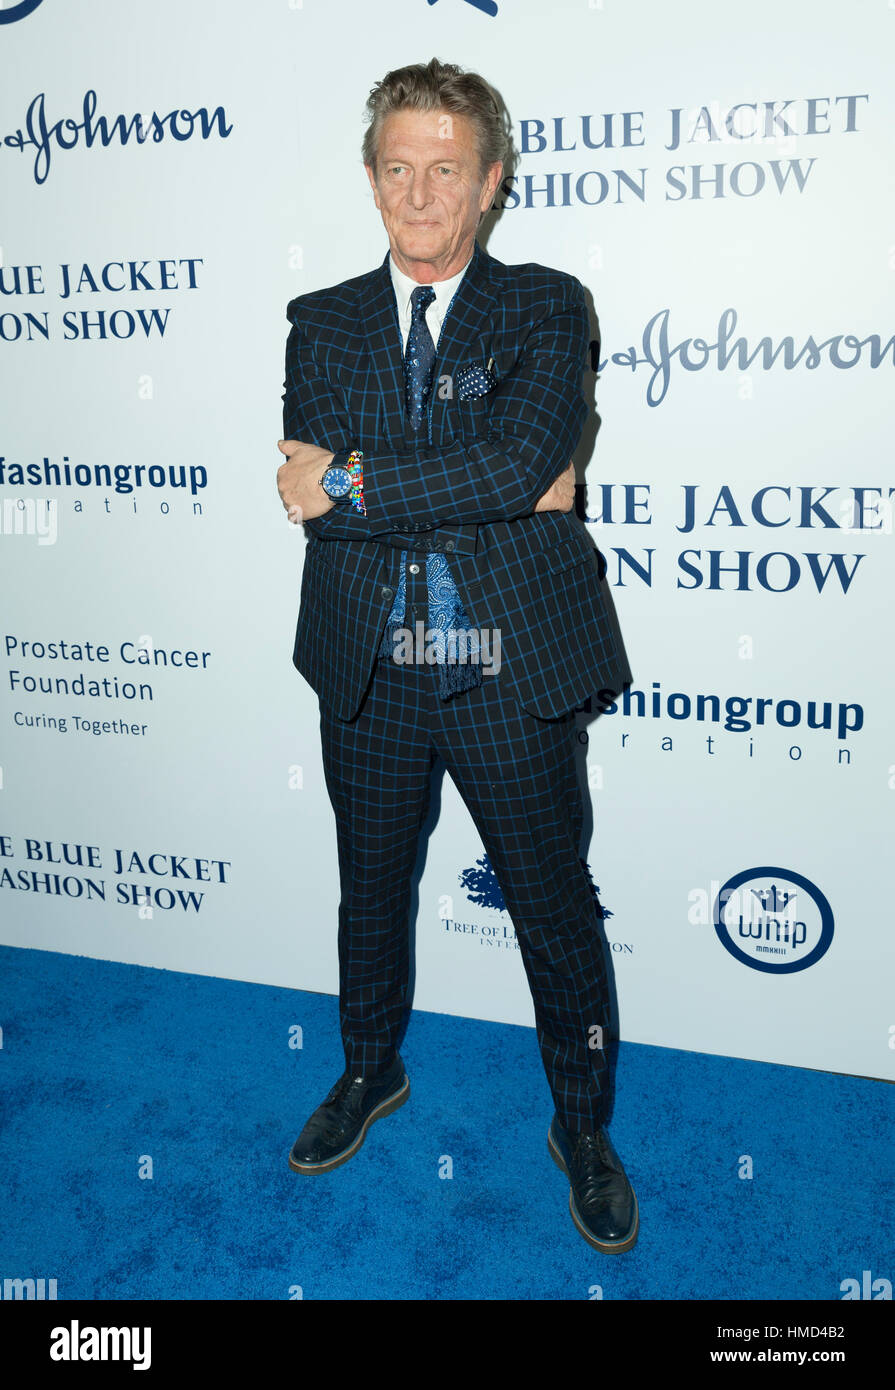 New York, United States. 01st Feb, 2017. Nick Graham attends the blue jacket fashon show in support for prostate cancer awarness during New York Fashion week at Pier 59 Credit: Lev Radin/Pacific Press/Alamy Live News Stock Photo